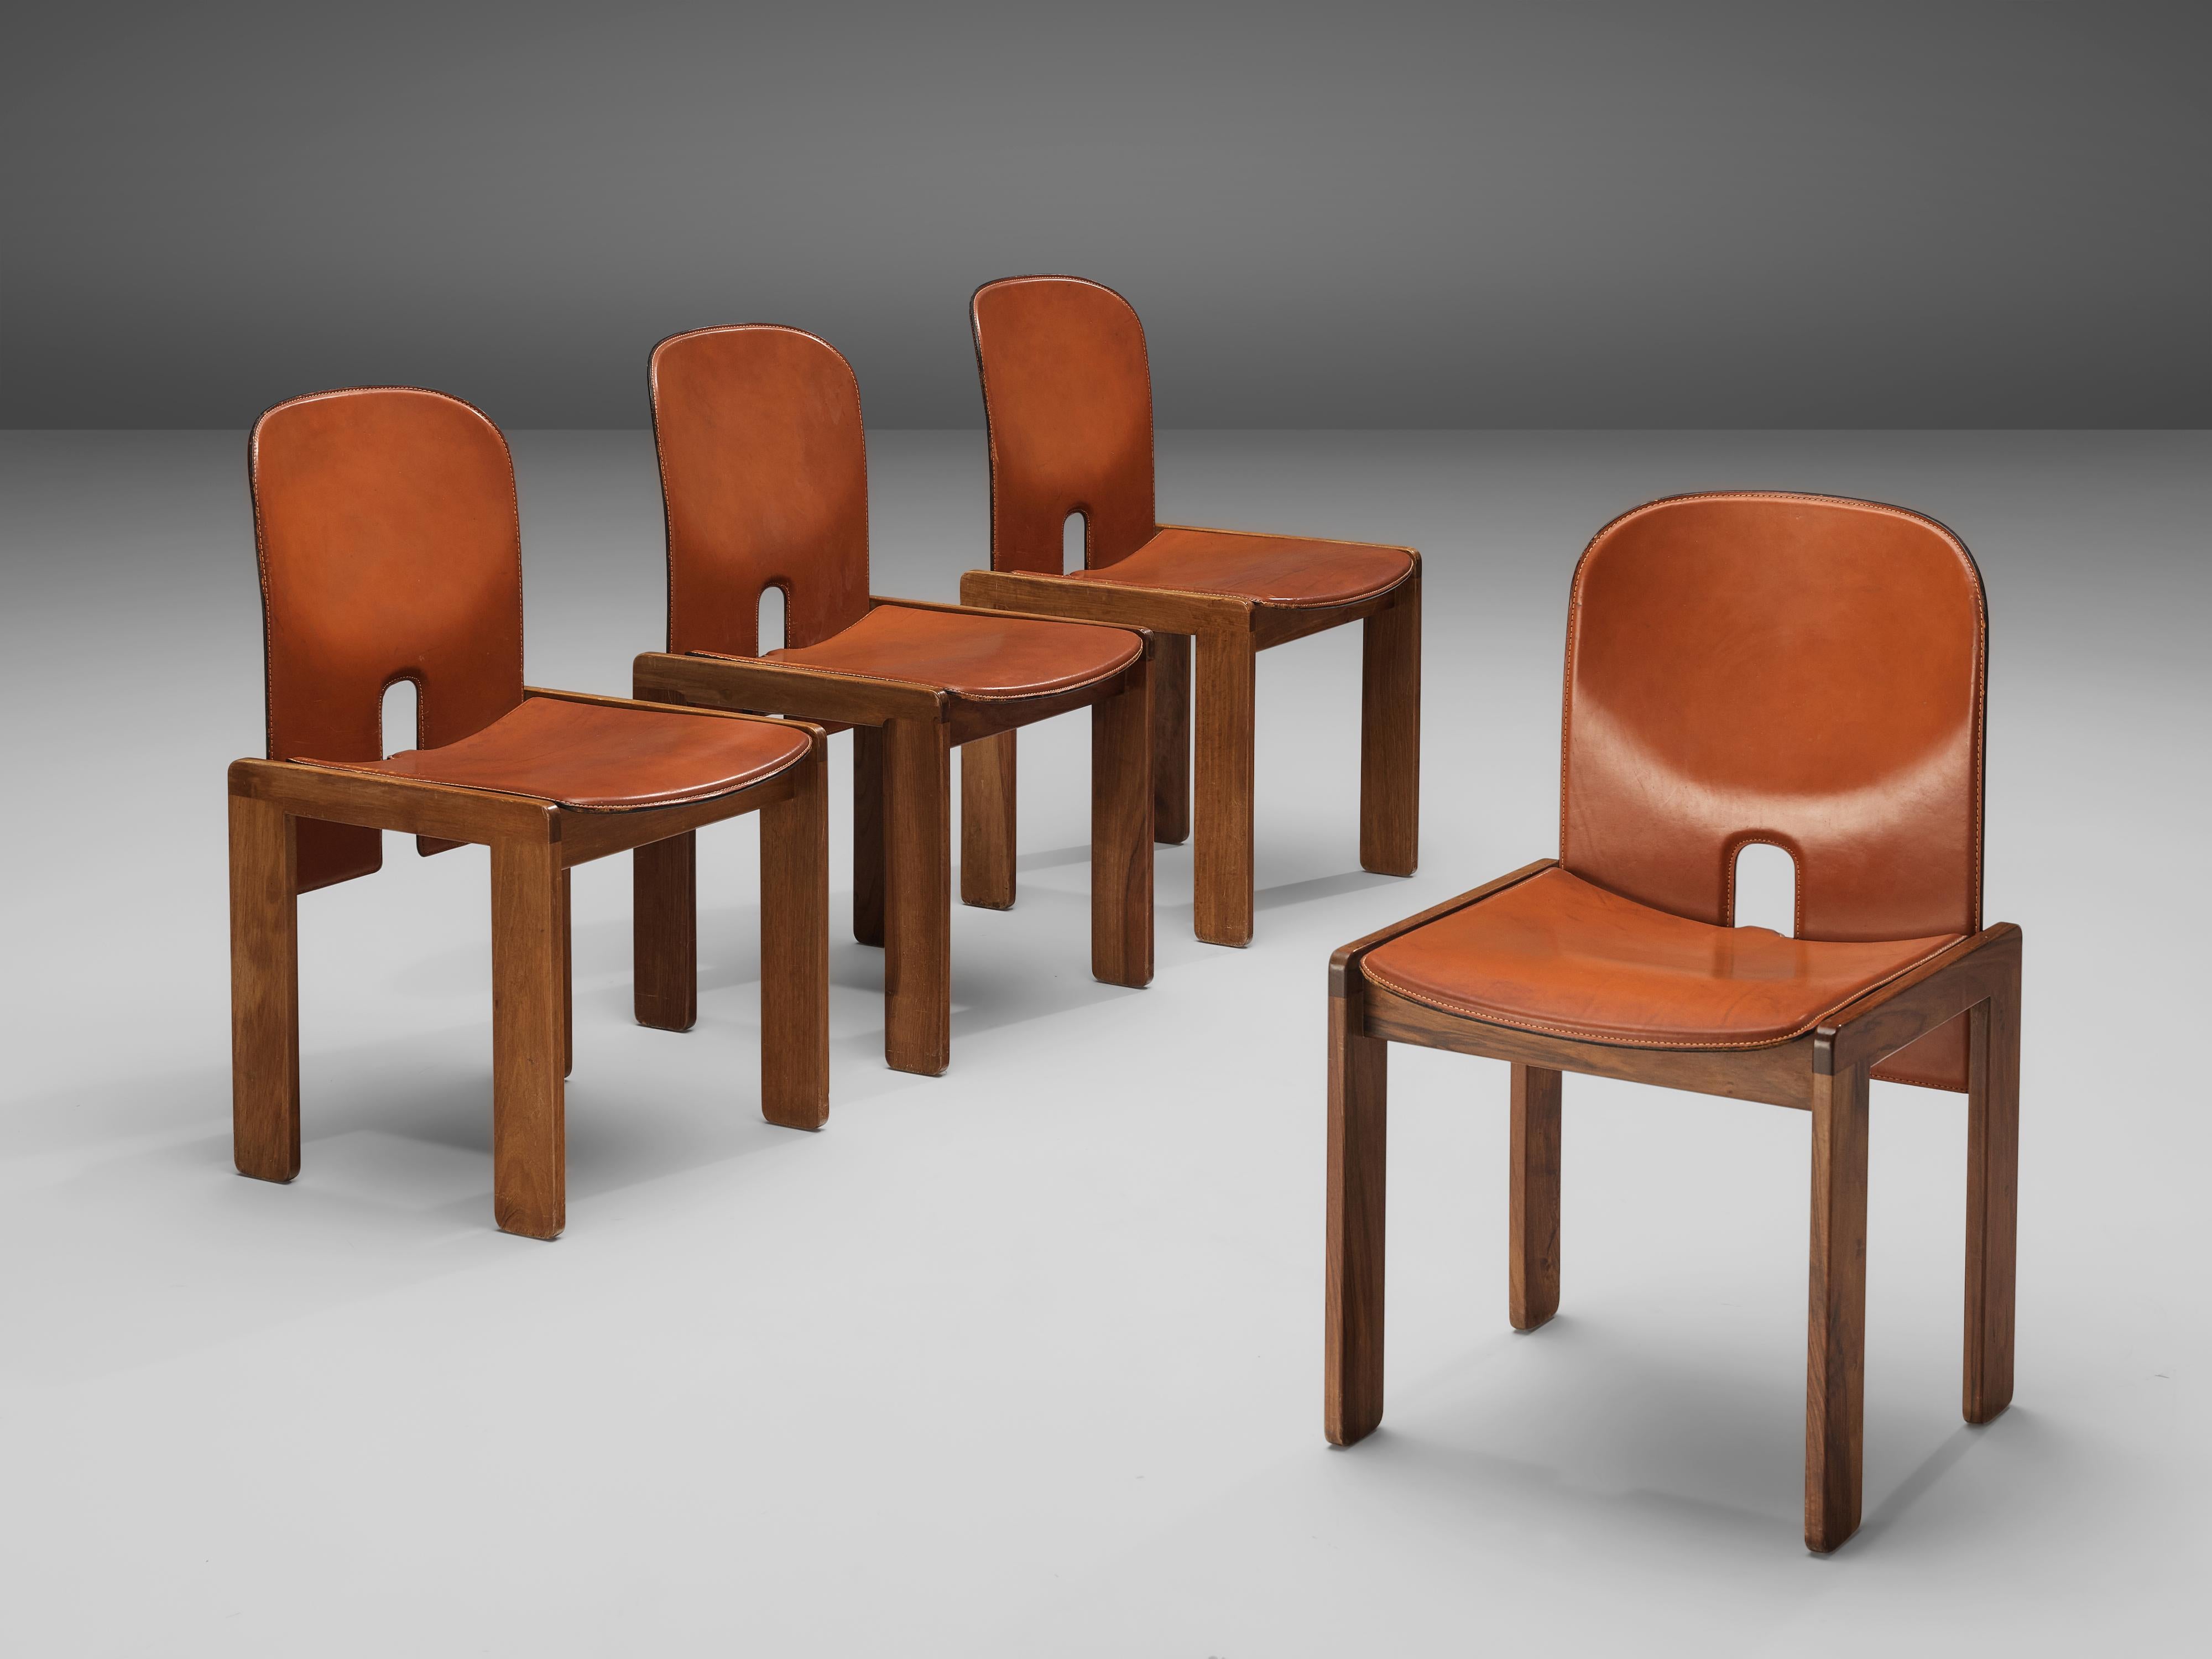 Afra & Tobia Scarpa for Cassina, dining chairs model '121', wood, leather, Italy, design 1965

Set of four chairs by the Italian designer couple Tobia & Afra Scarpa. These chairs have a cubic and architectural appearance. The base consists of four